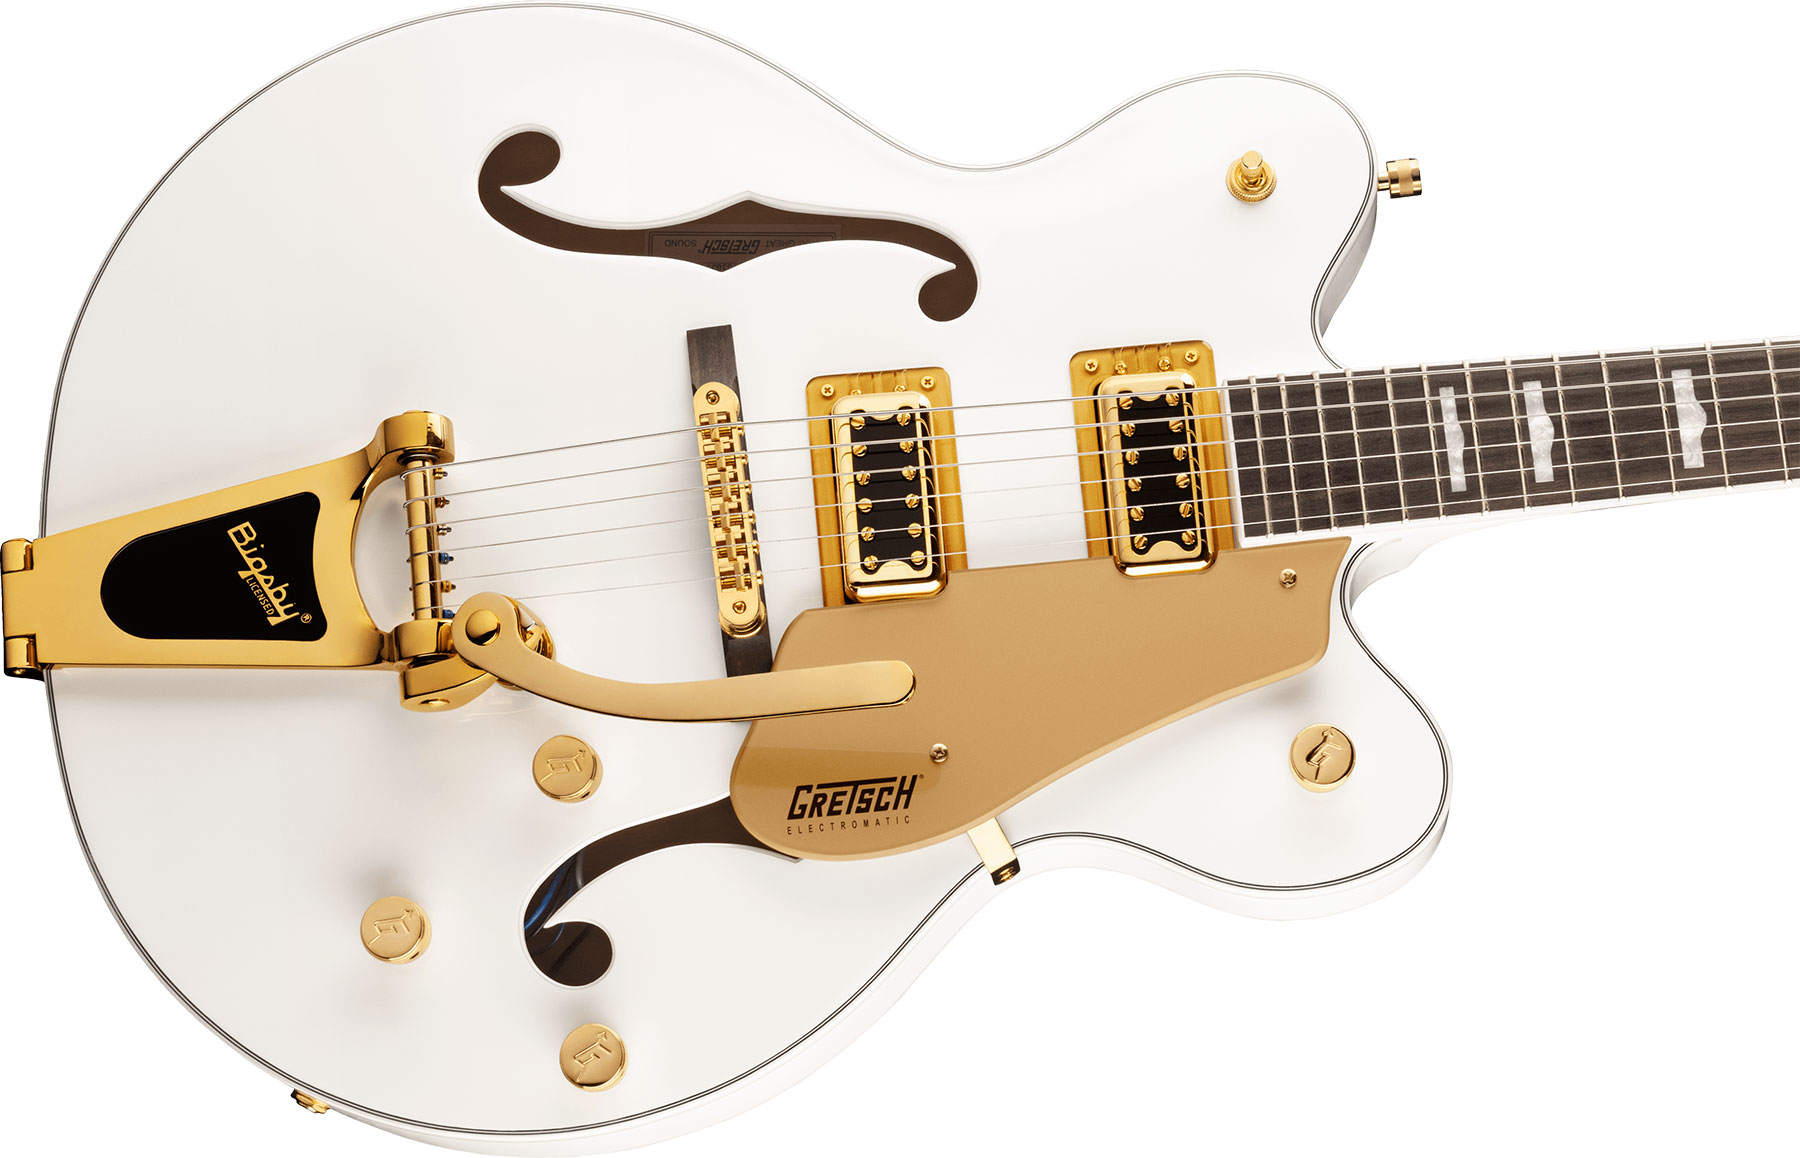 Gretsch G5422tg Electromatic Classic Hollow Body Dc Bigsby Hh Lau - Snowcrest White - Semi-hollow electric guitar - Variation 2